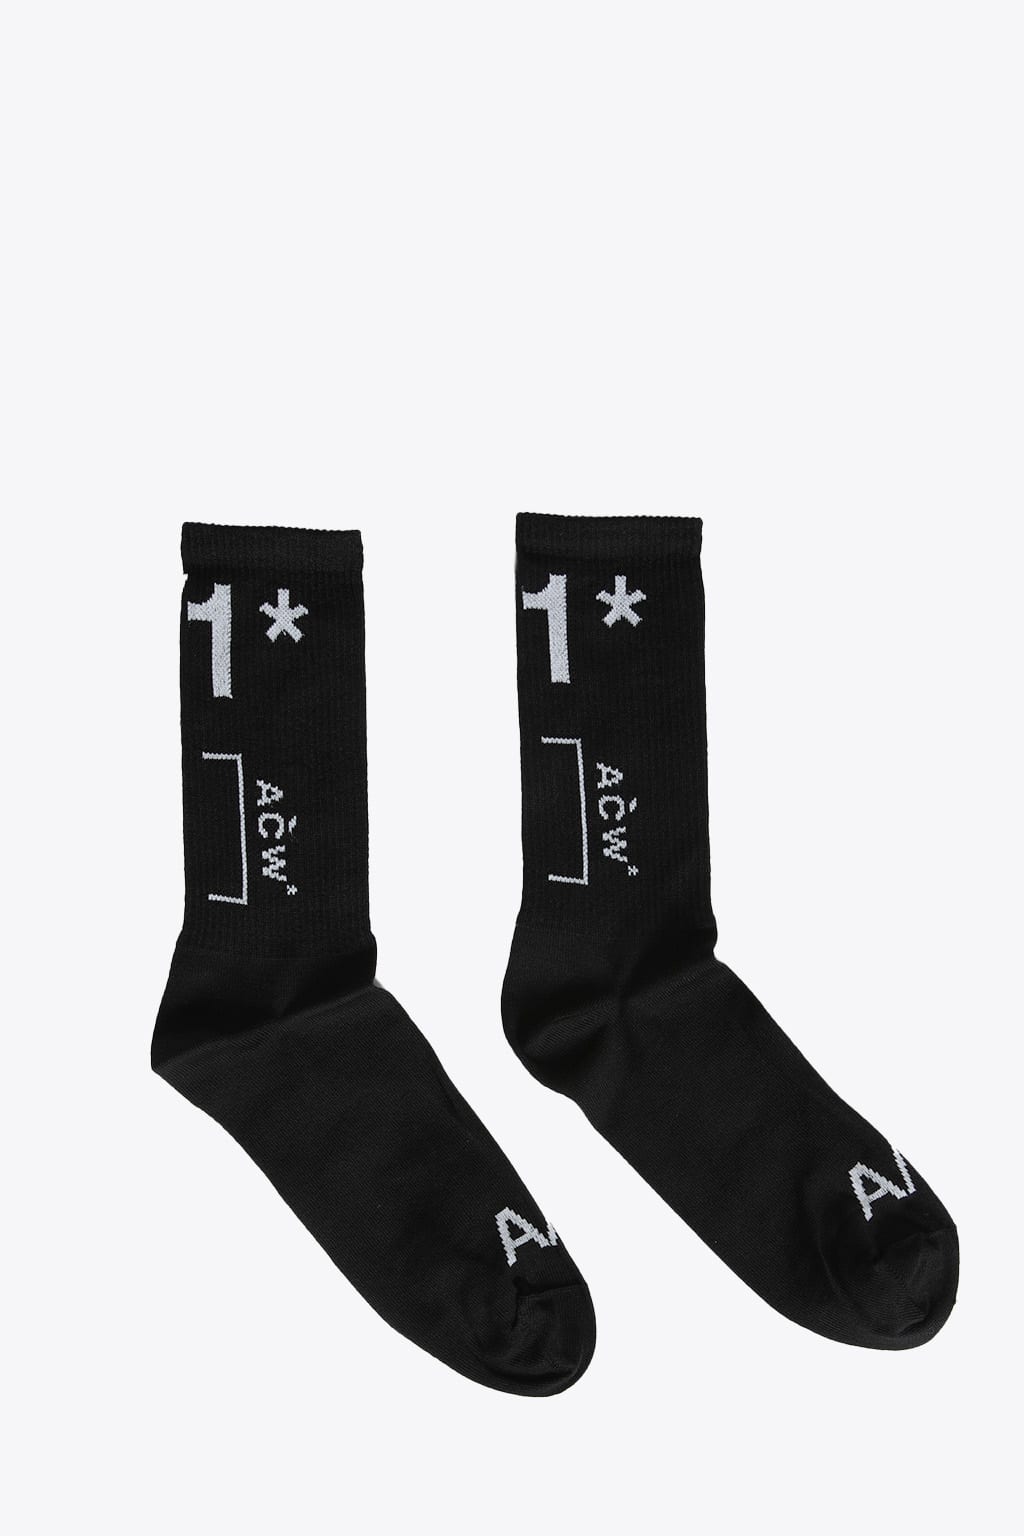 A-COLD-WALL Knitted Jacquard Sock Black socks with yellow logo